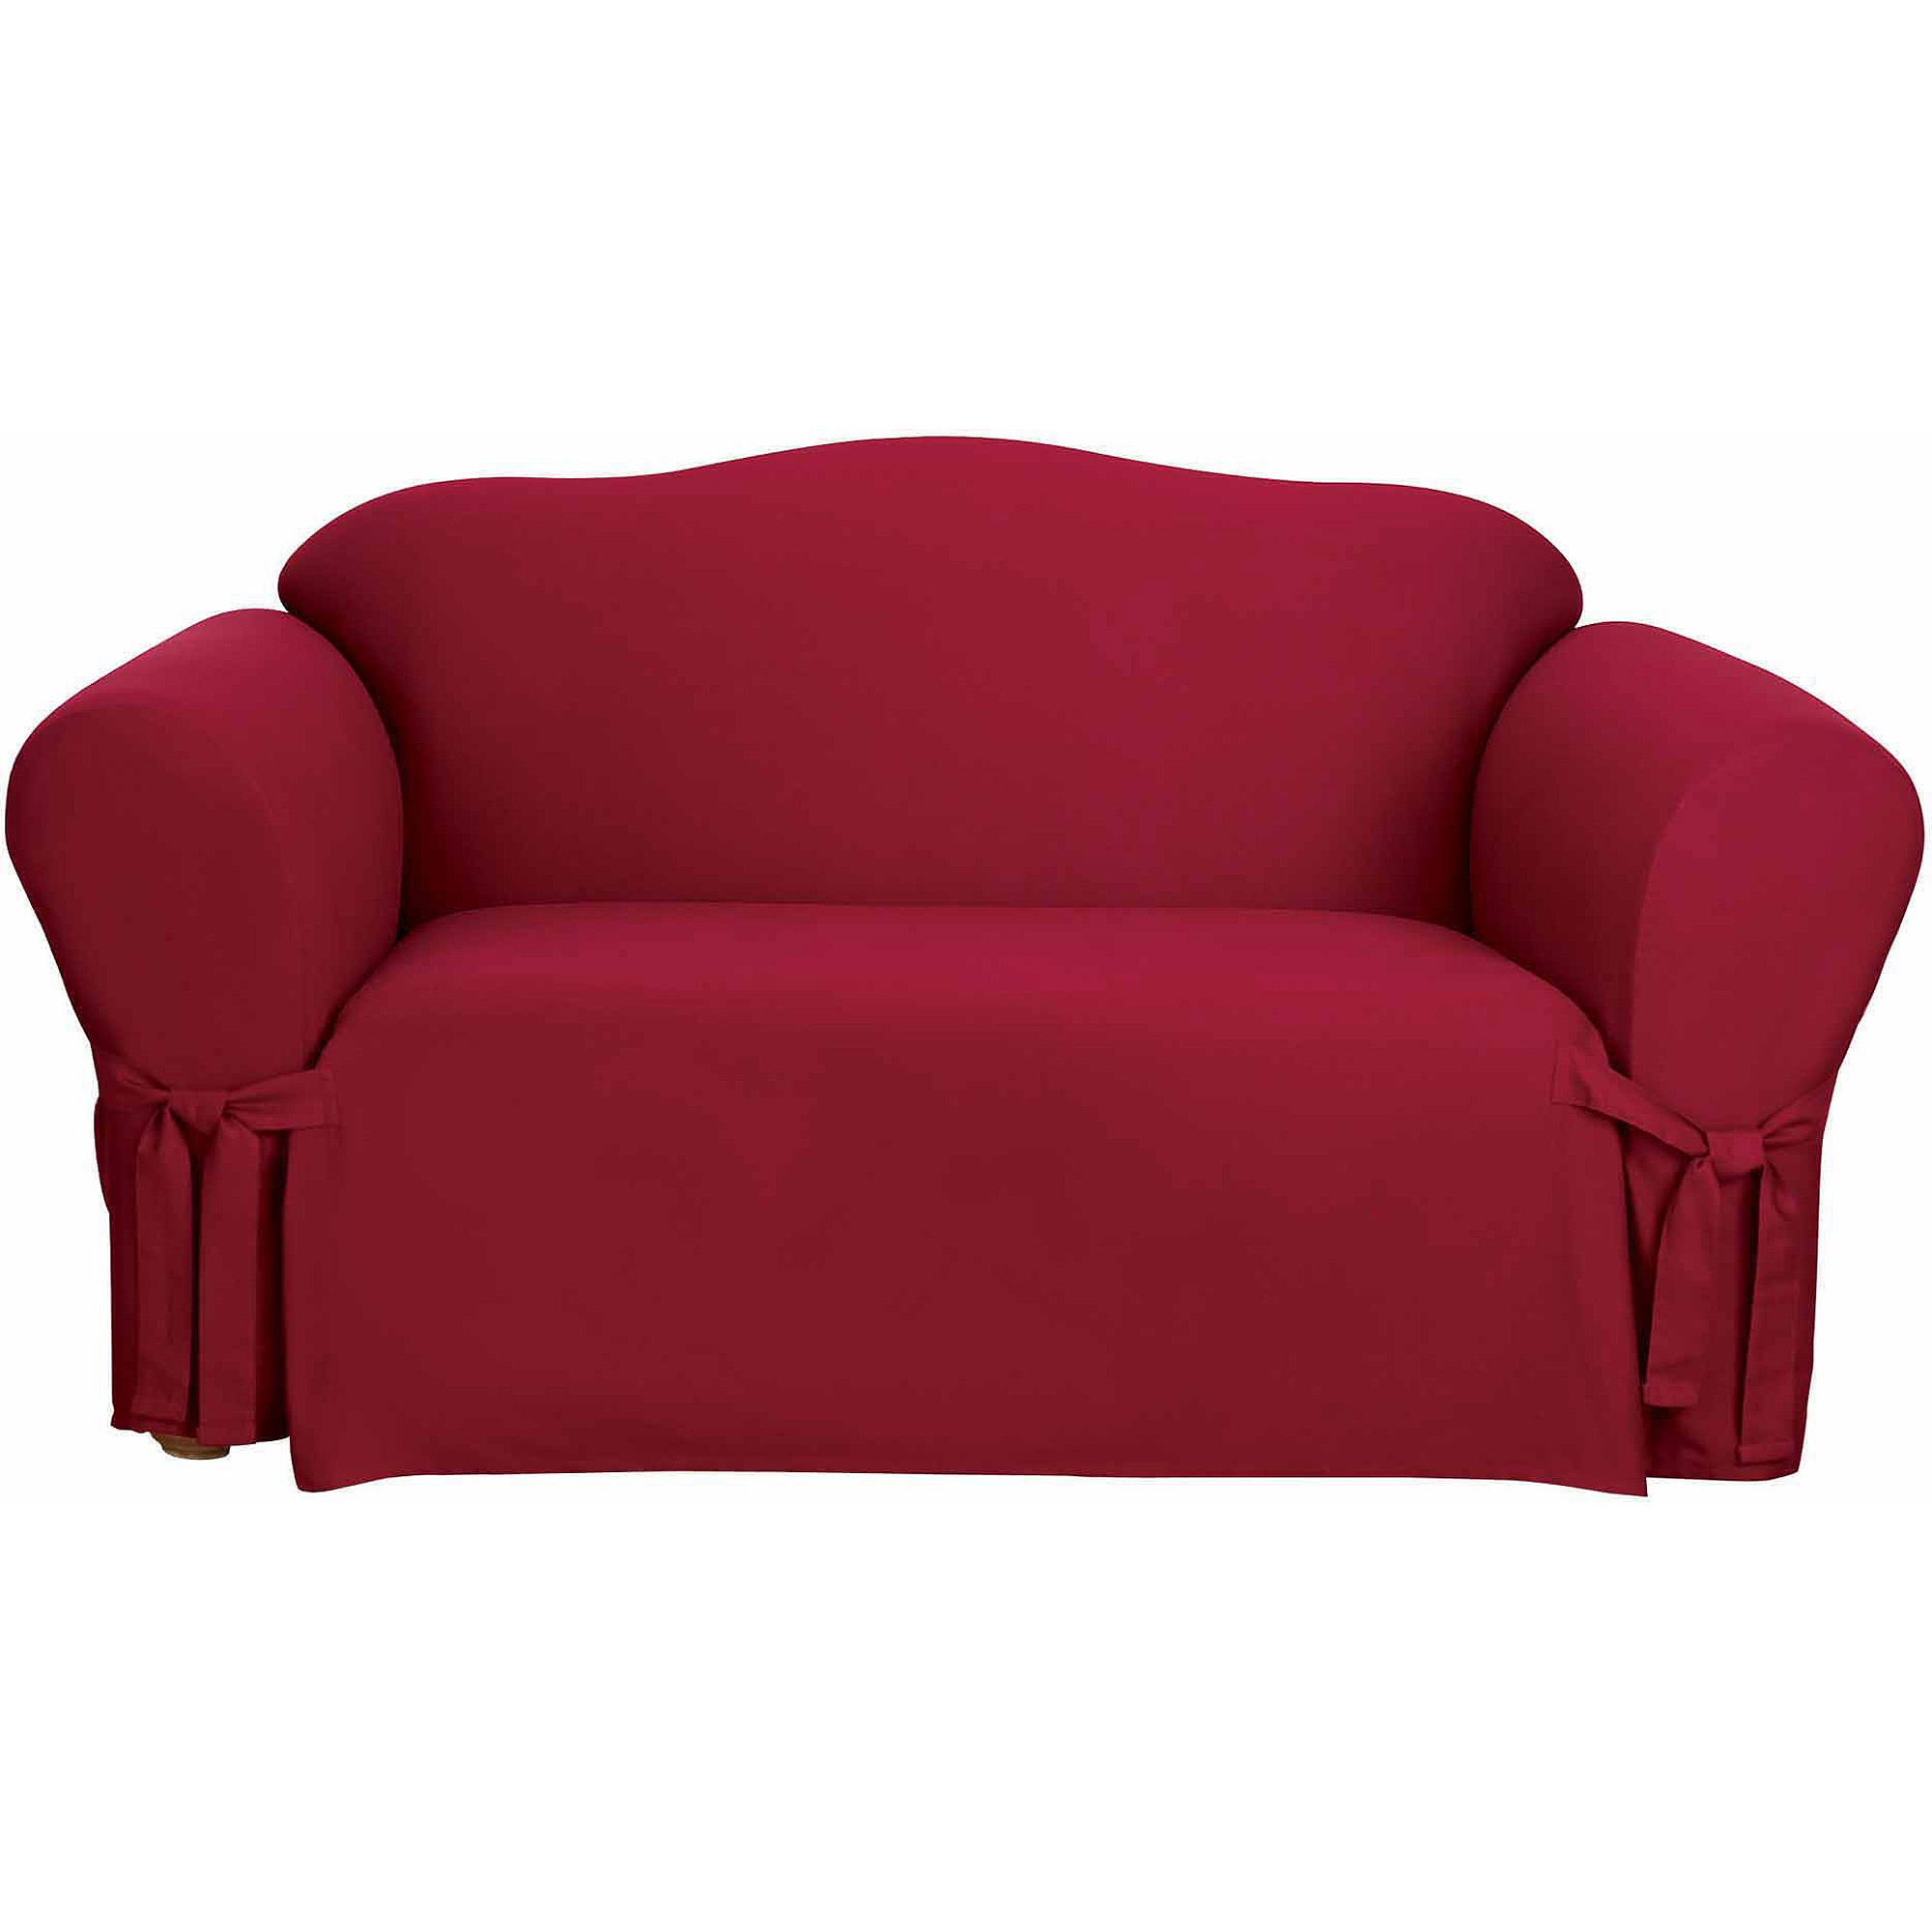 Sure Fit Cotton Duck Loveseat Slipcover - image 1 of 2